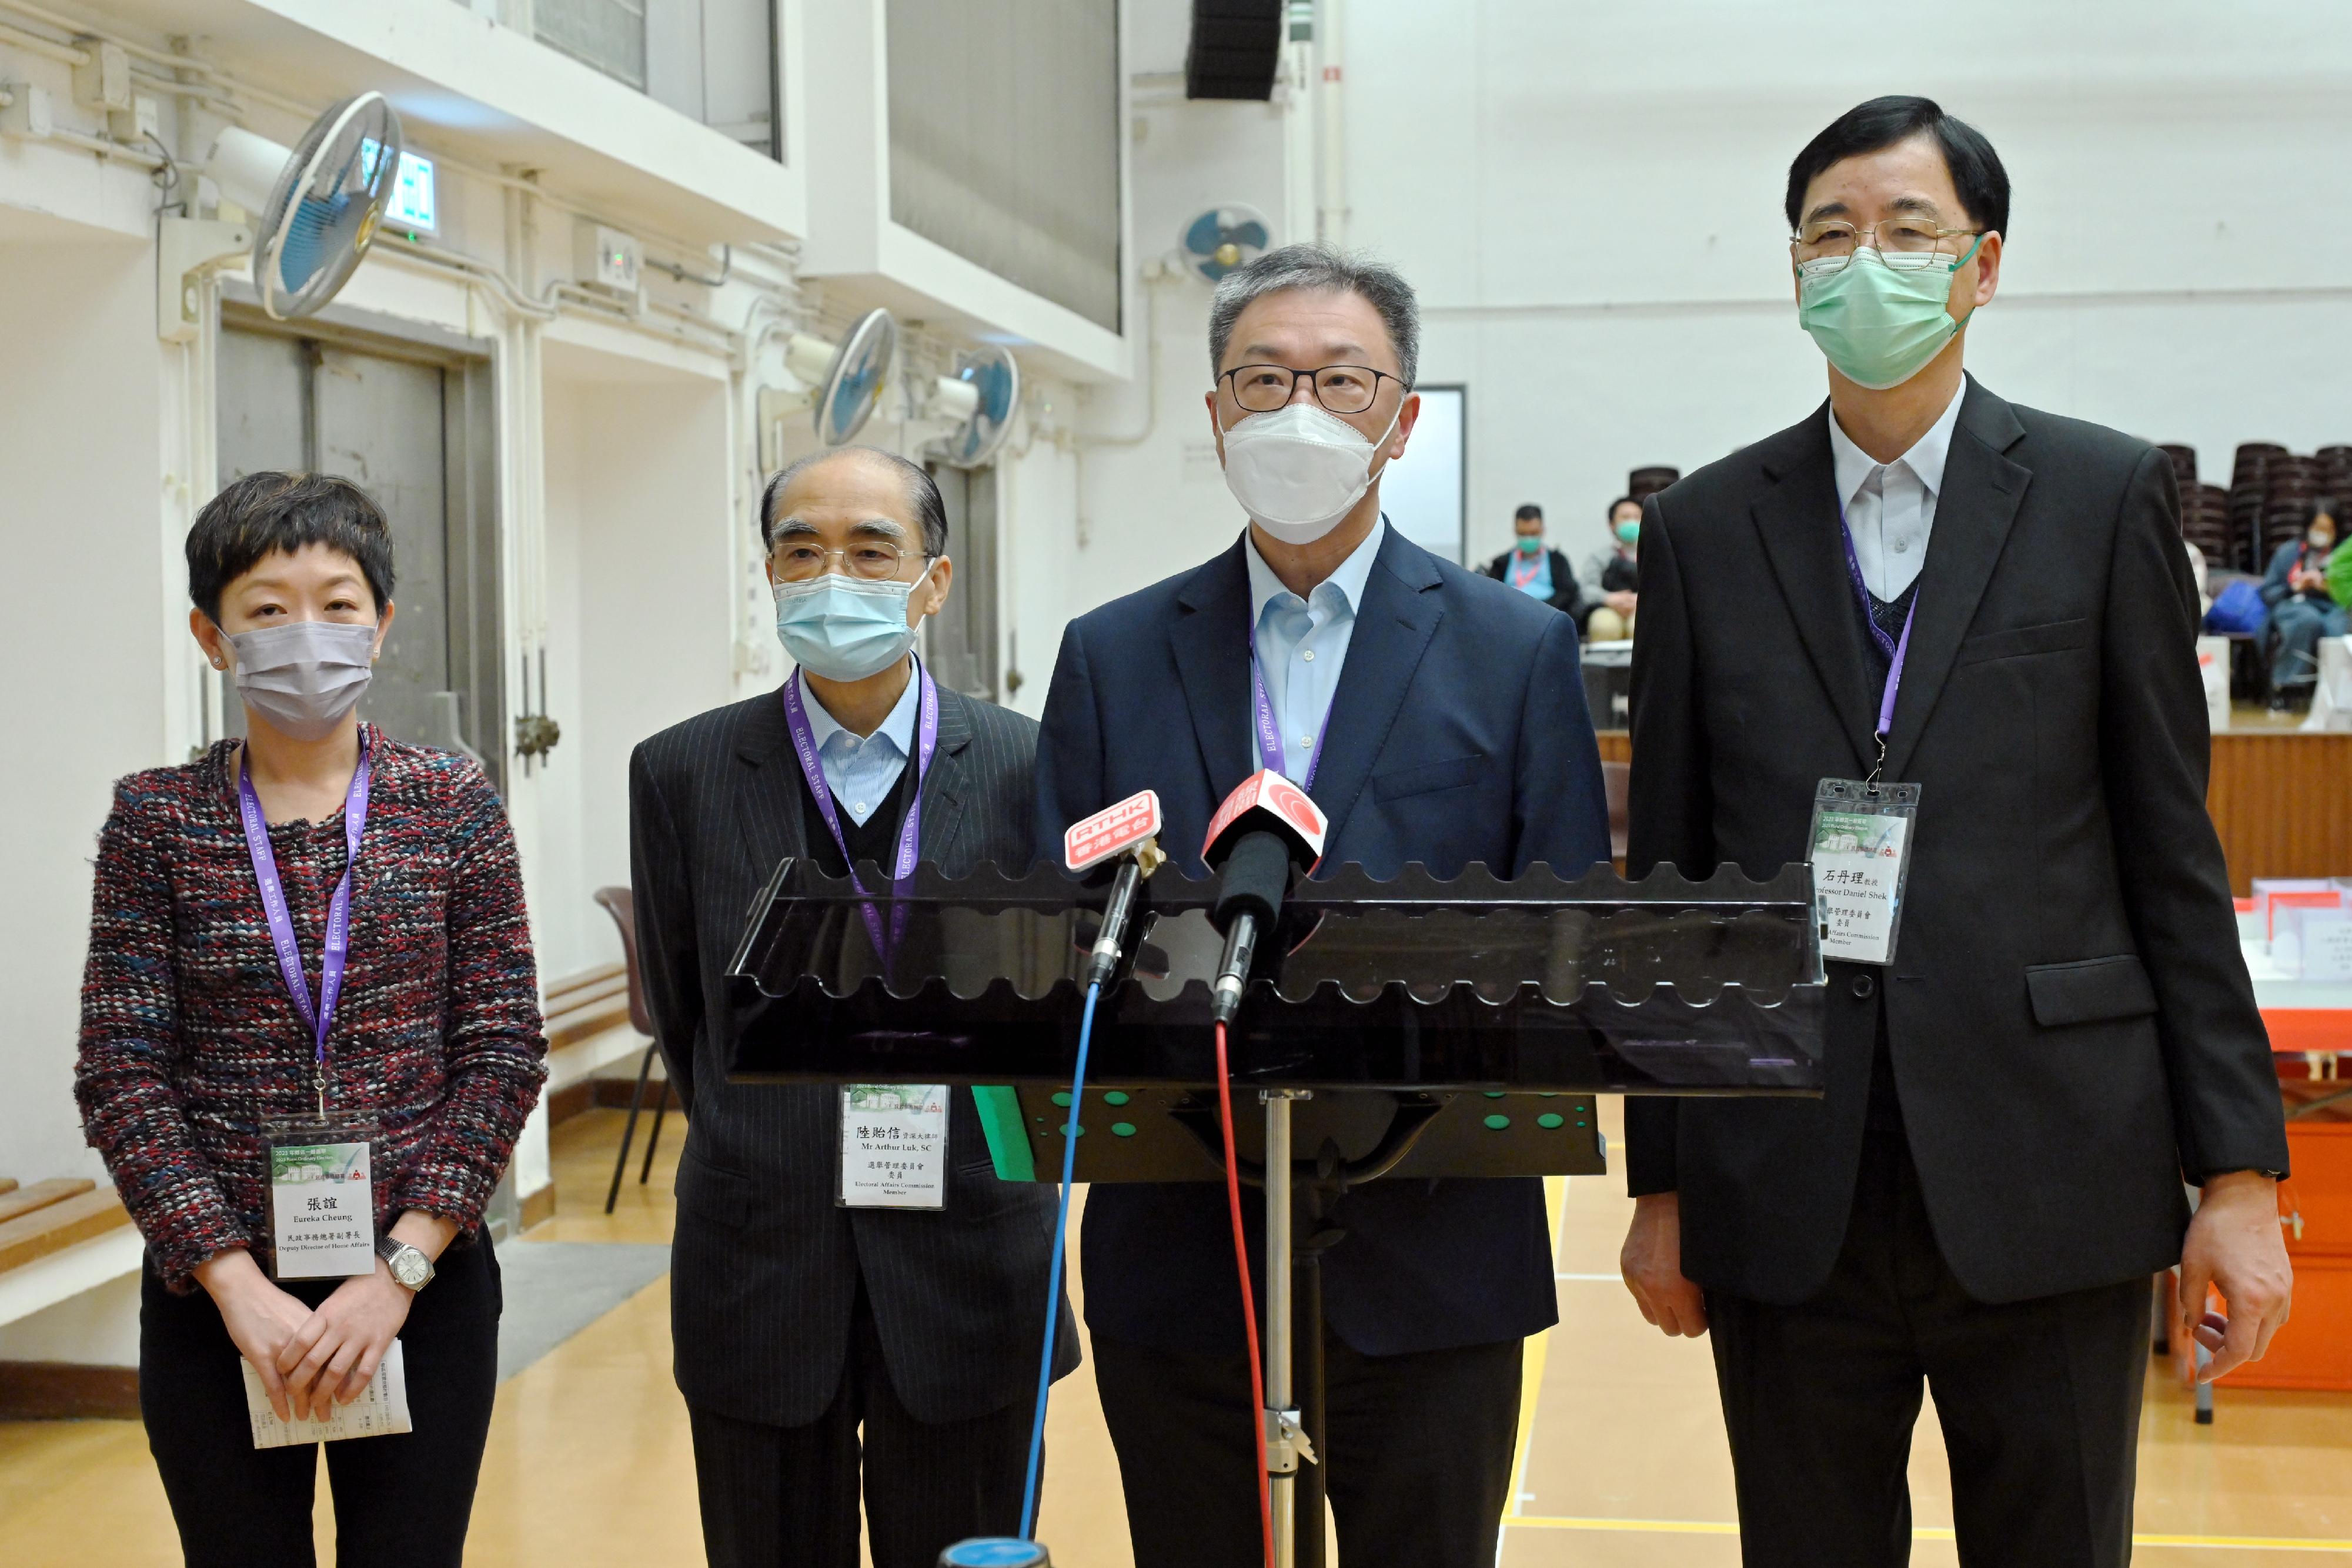 The Chairman of the Electoral Affairs Commission (EAC), Mr Justice David Lok (second right), EAC members Mr Arthur Luk, SC (second left), and Professor Daniel Shek (first right) met the media after visiting the ballot paper sorting station of the Village Representative Election in the 2023 Rural Ordinary Election at Hin Keng Neighbourhood Community Centre, Sha Tin today (January 8). Also present was Deputy Director of Home Affairs Ms Eureka Cheung (first left).